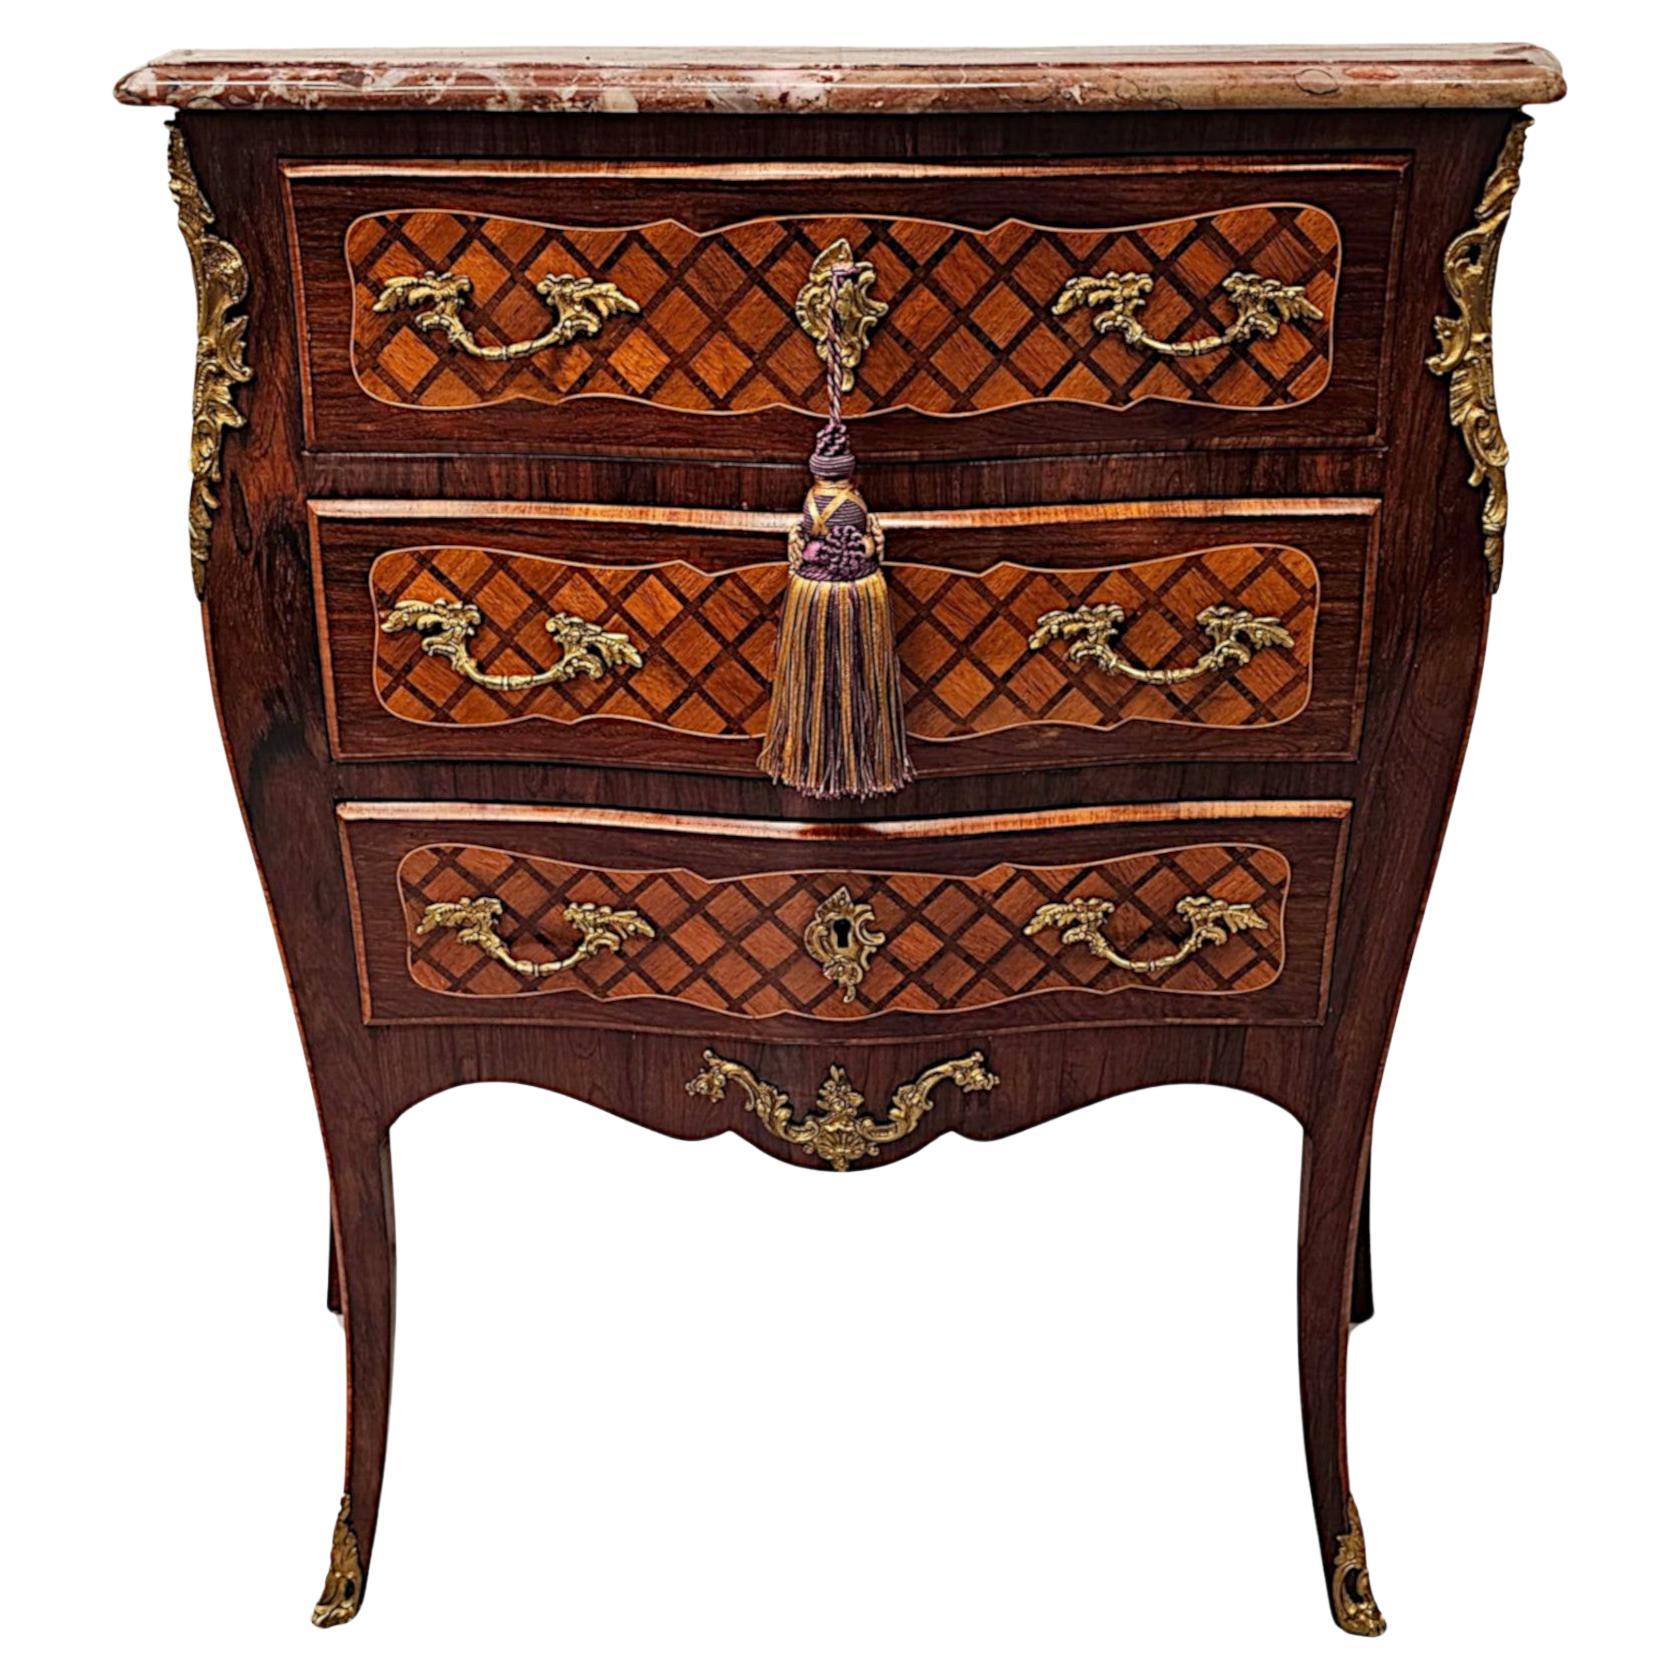 A Very Rare 19th Century Marble Top Inlaid Ormolu Mounted Chest of Drawers For Sale